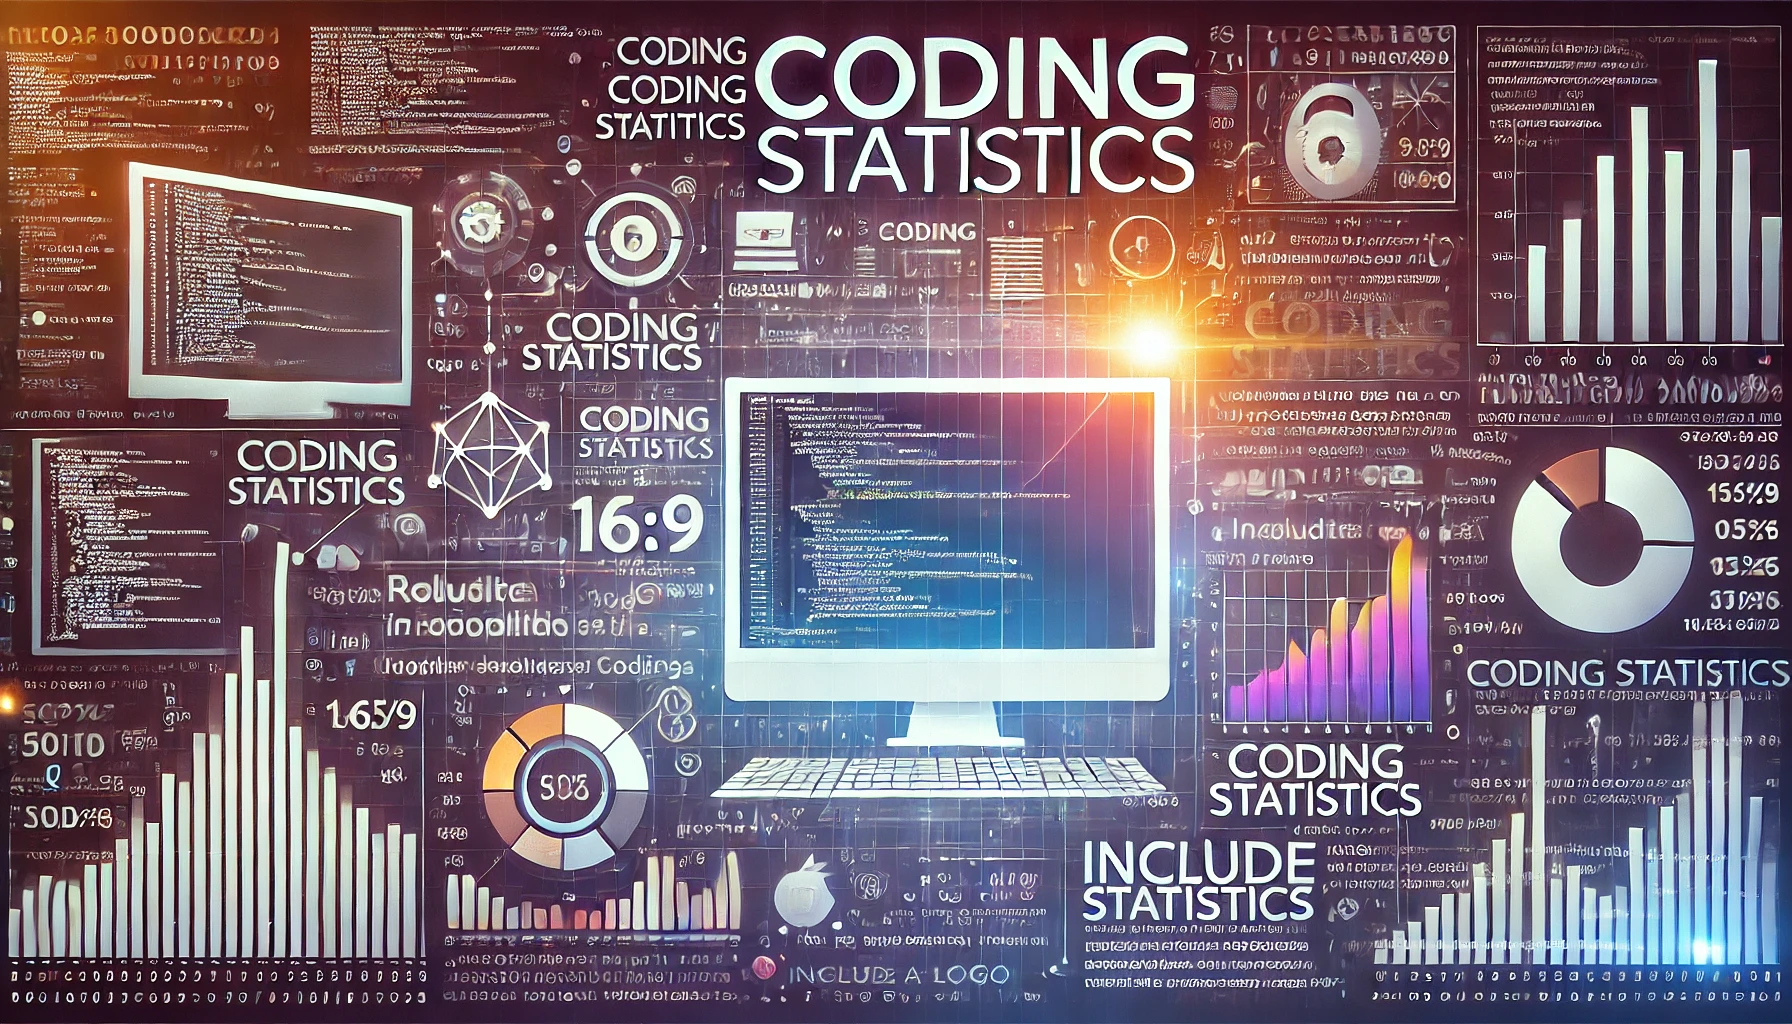 Coding Statistics By Opportunities, Fastest-Growing Coding Jobs and Facts